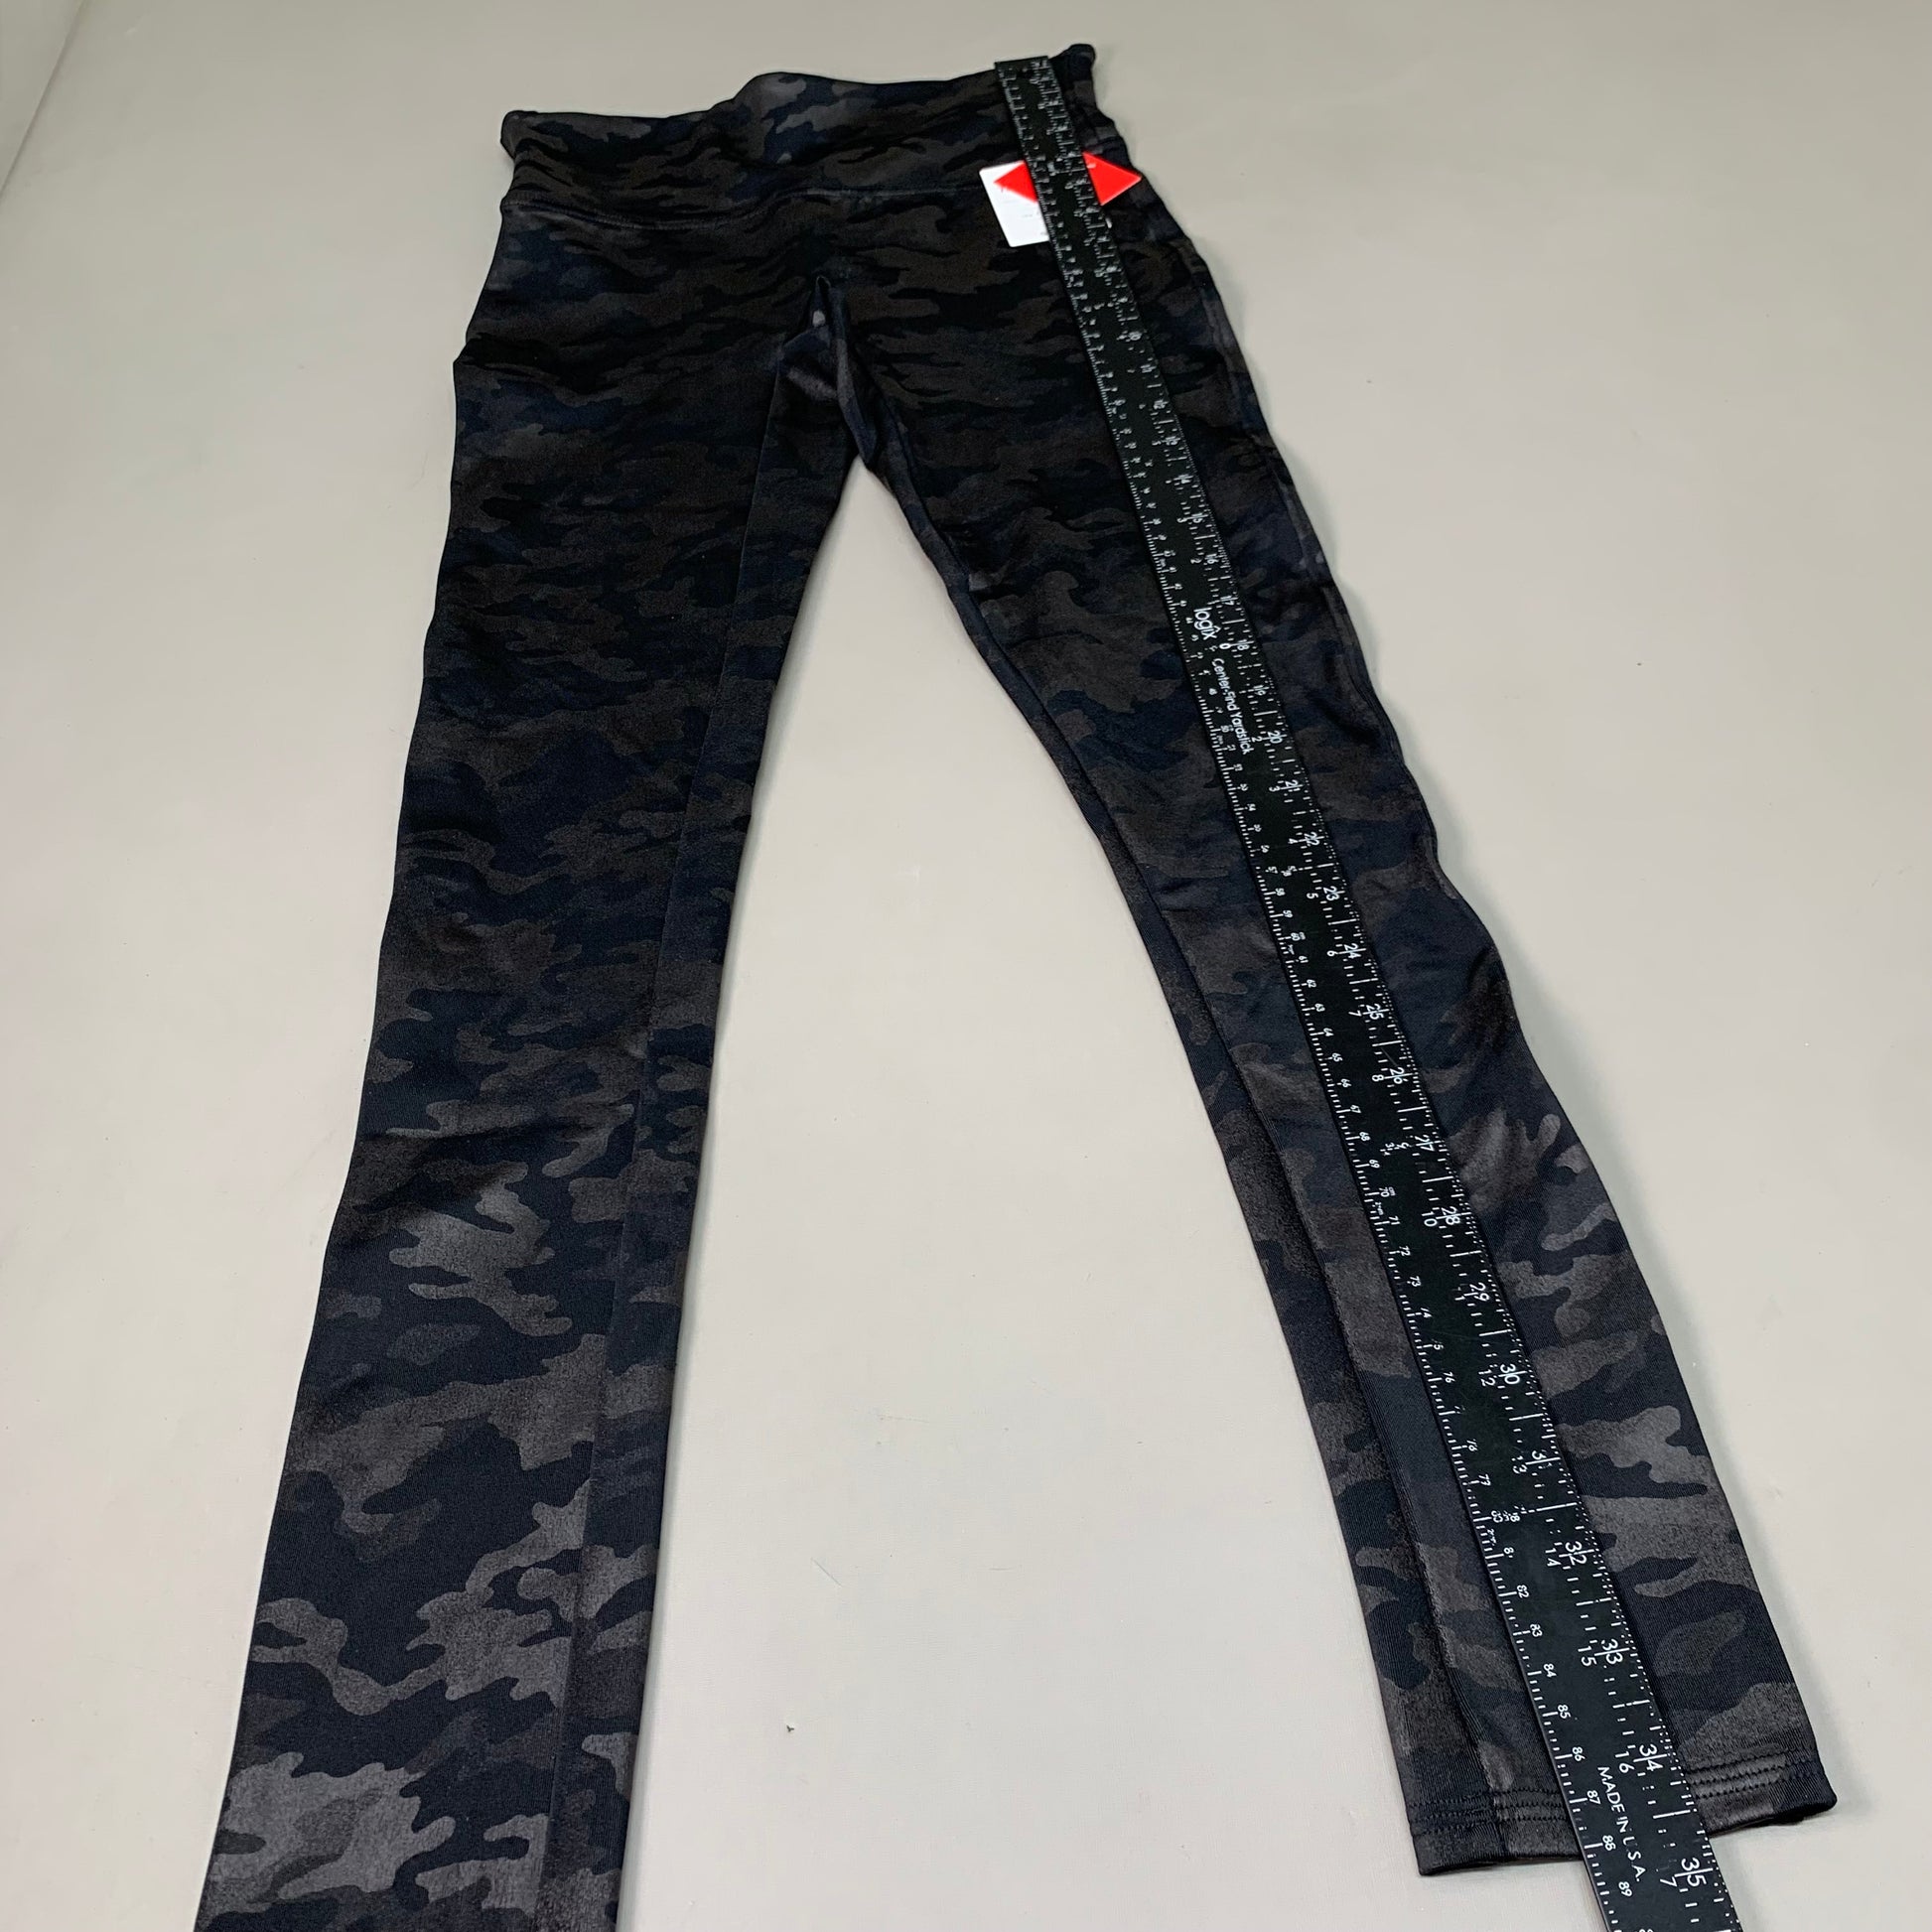 SPANX, Pants & Jumpsuits, Spanx 285 Faux Leather Black Camo Leggings  Small